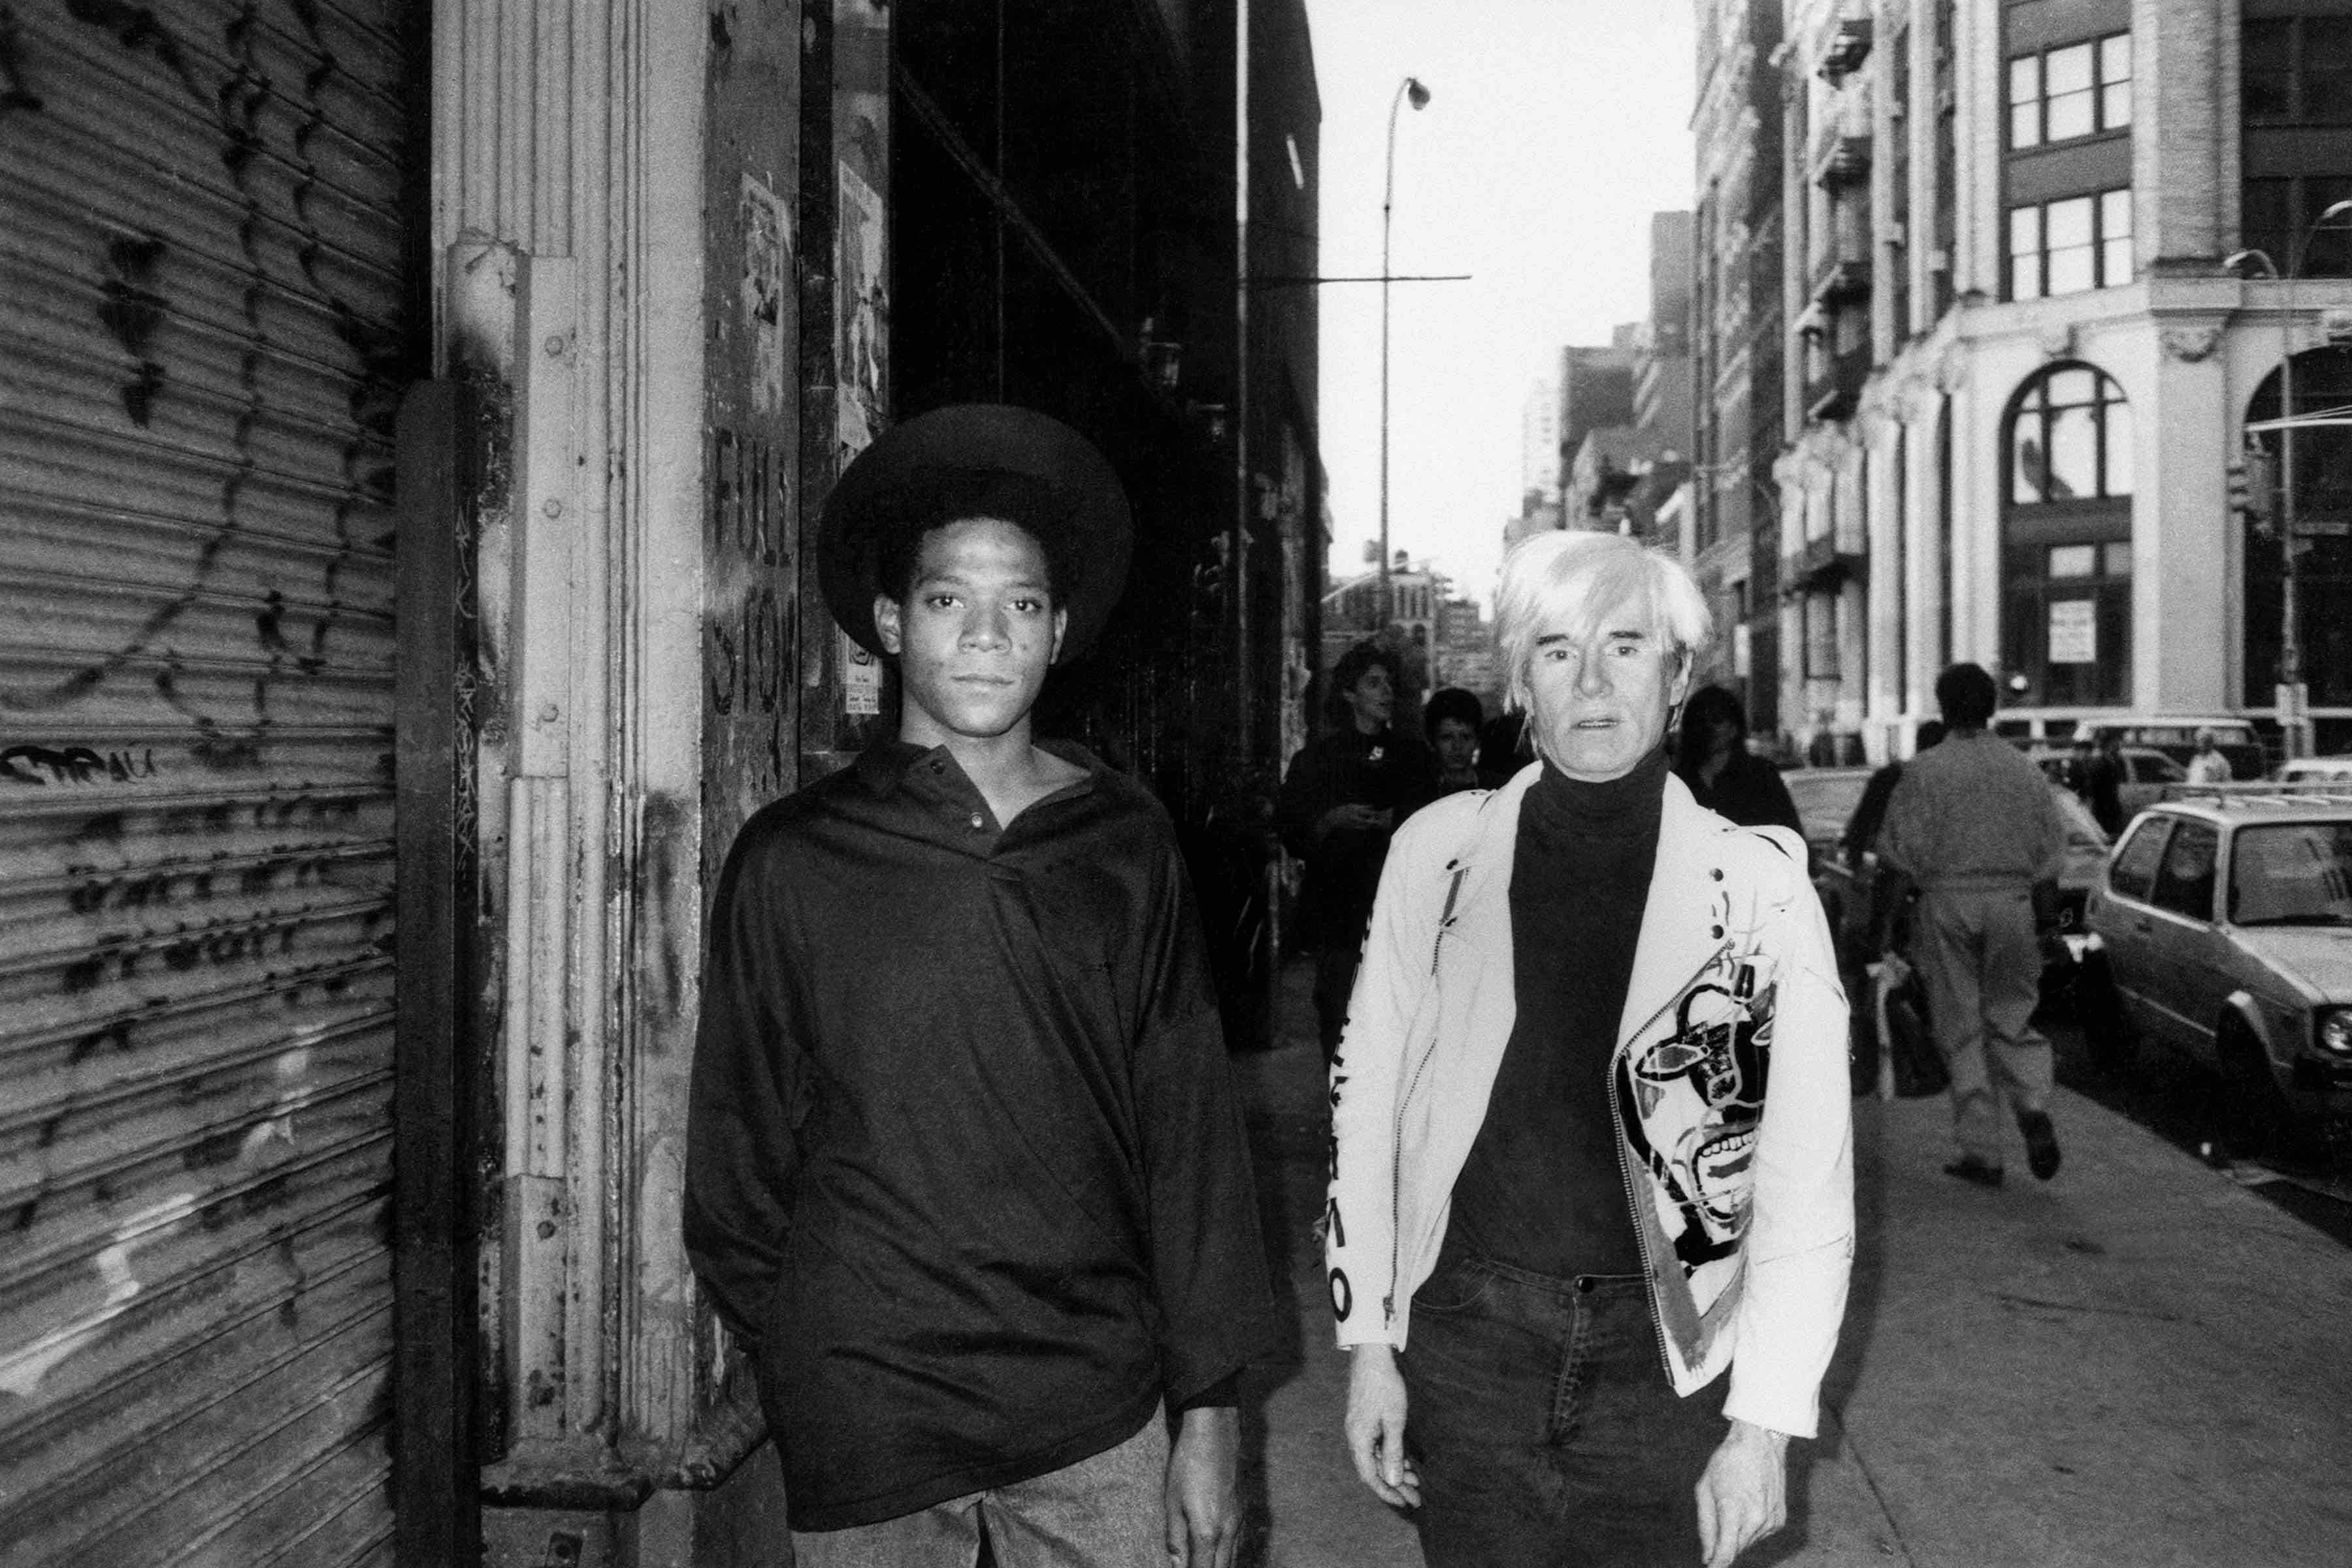 Ricky Powell Black and White Photograph - Basquiat and Warhol Mercer Street 